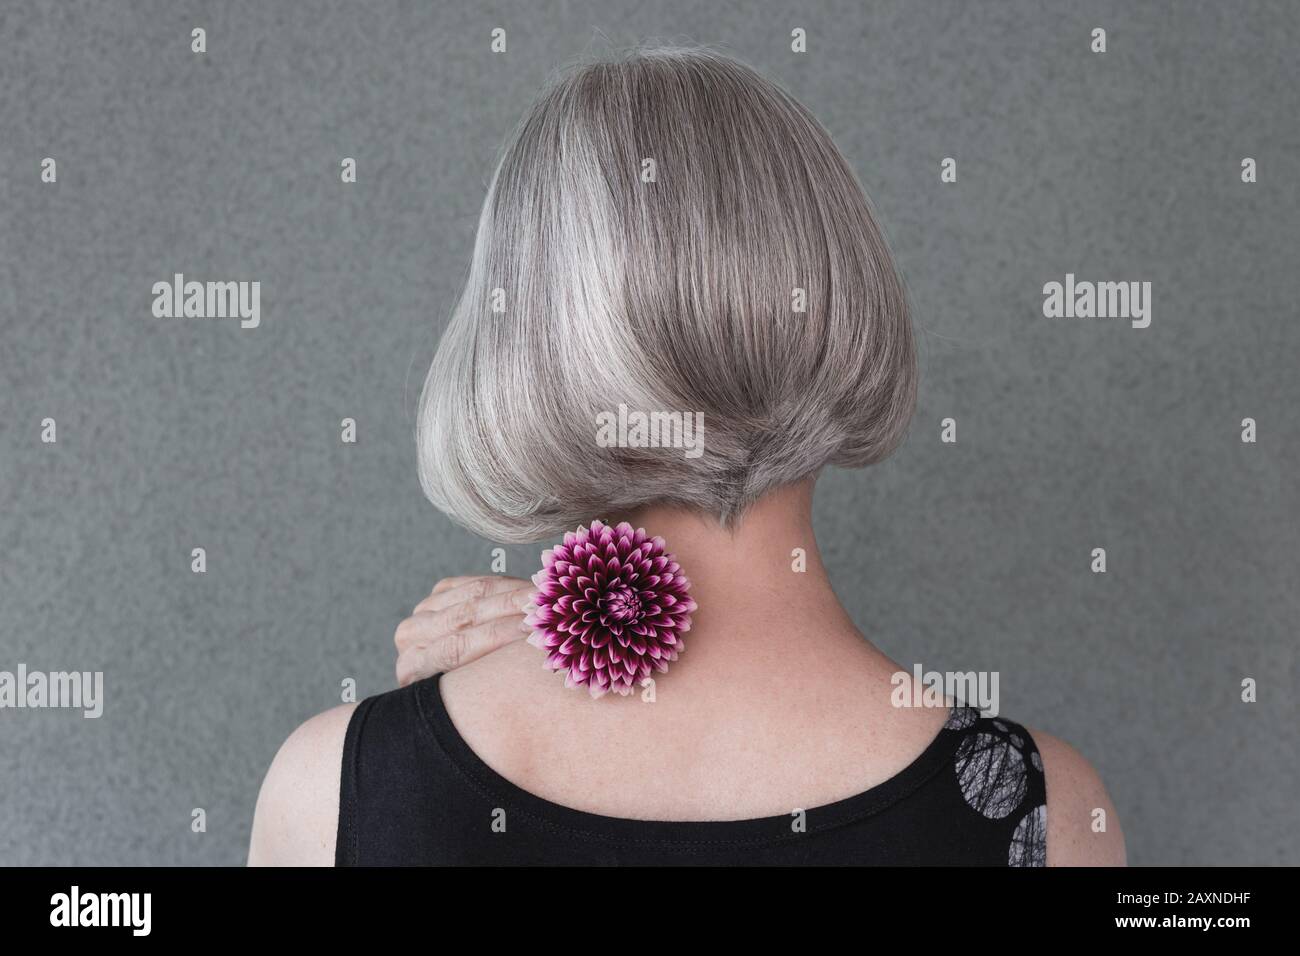 Lady with beautiful silver hair and dark red dahlia, on neutral background. Stock Photo